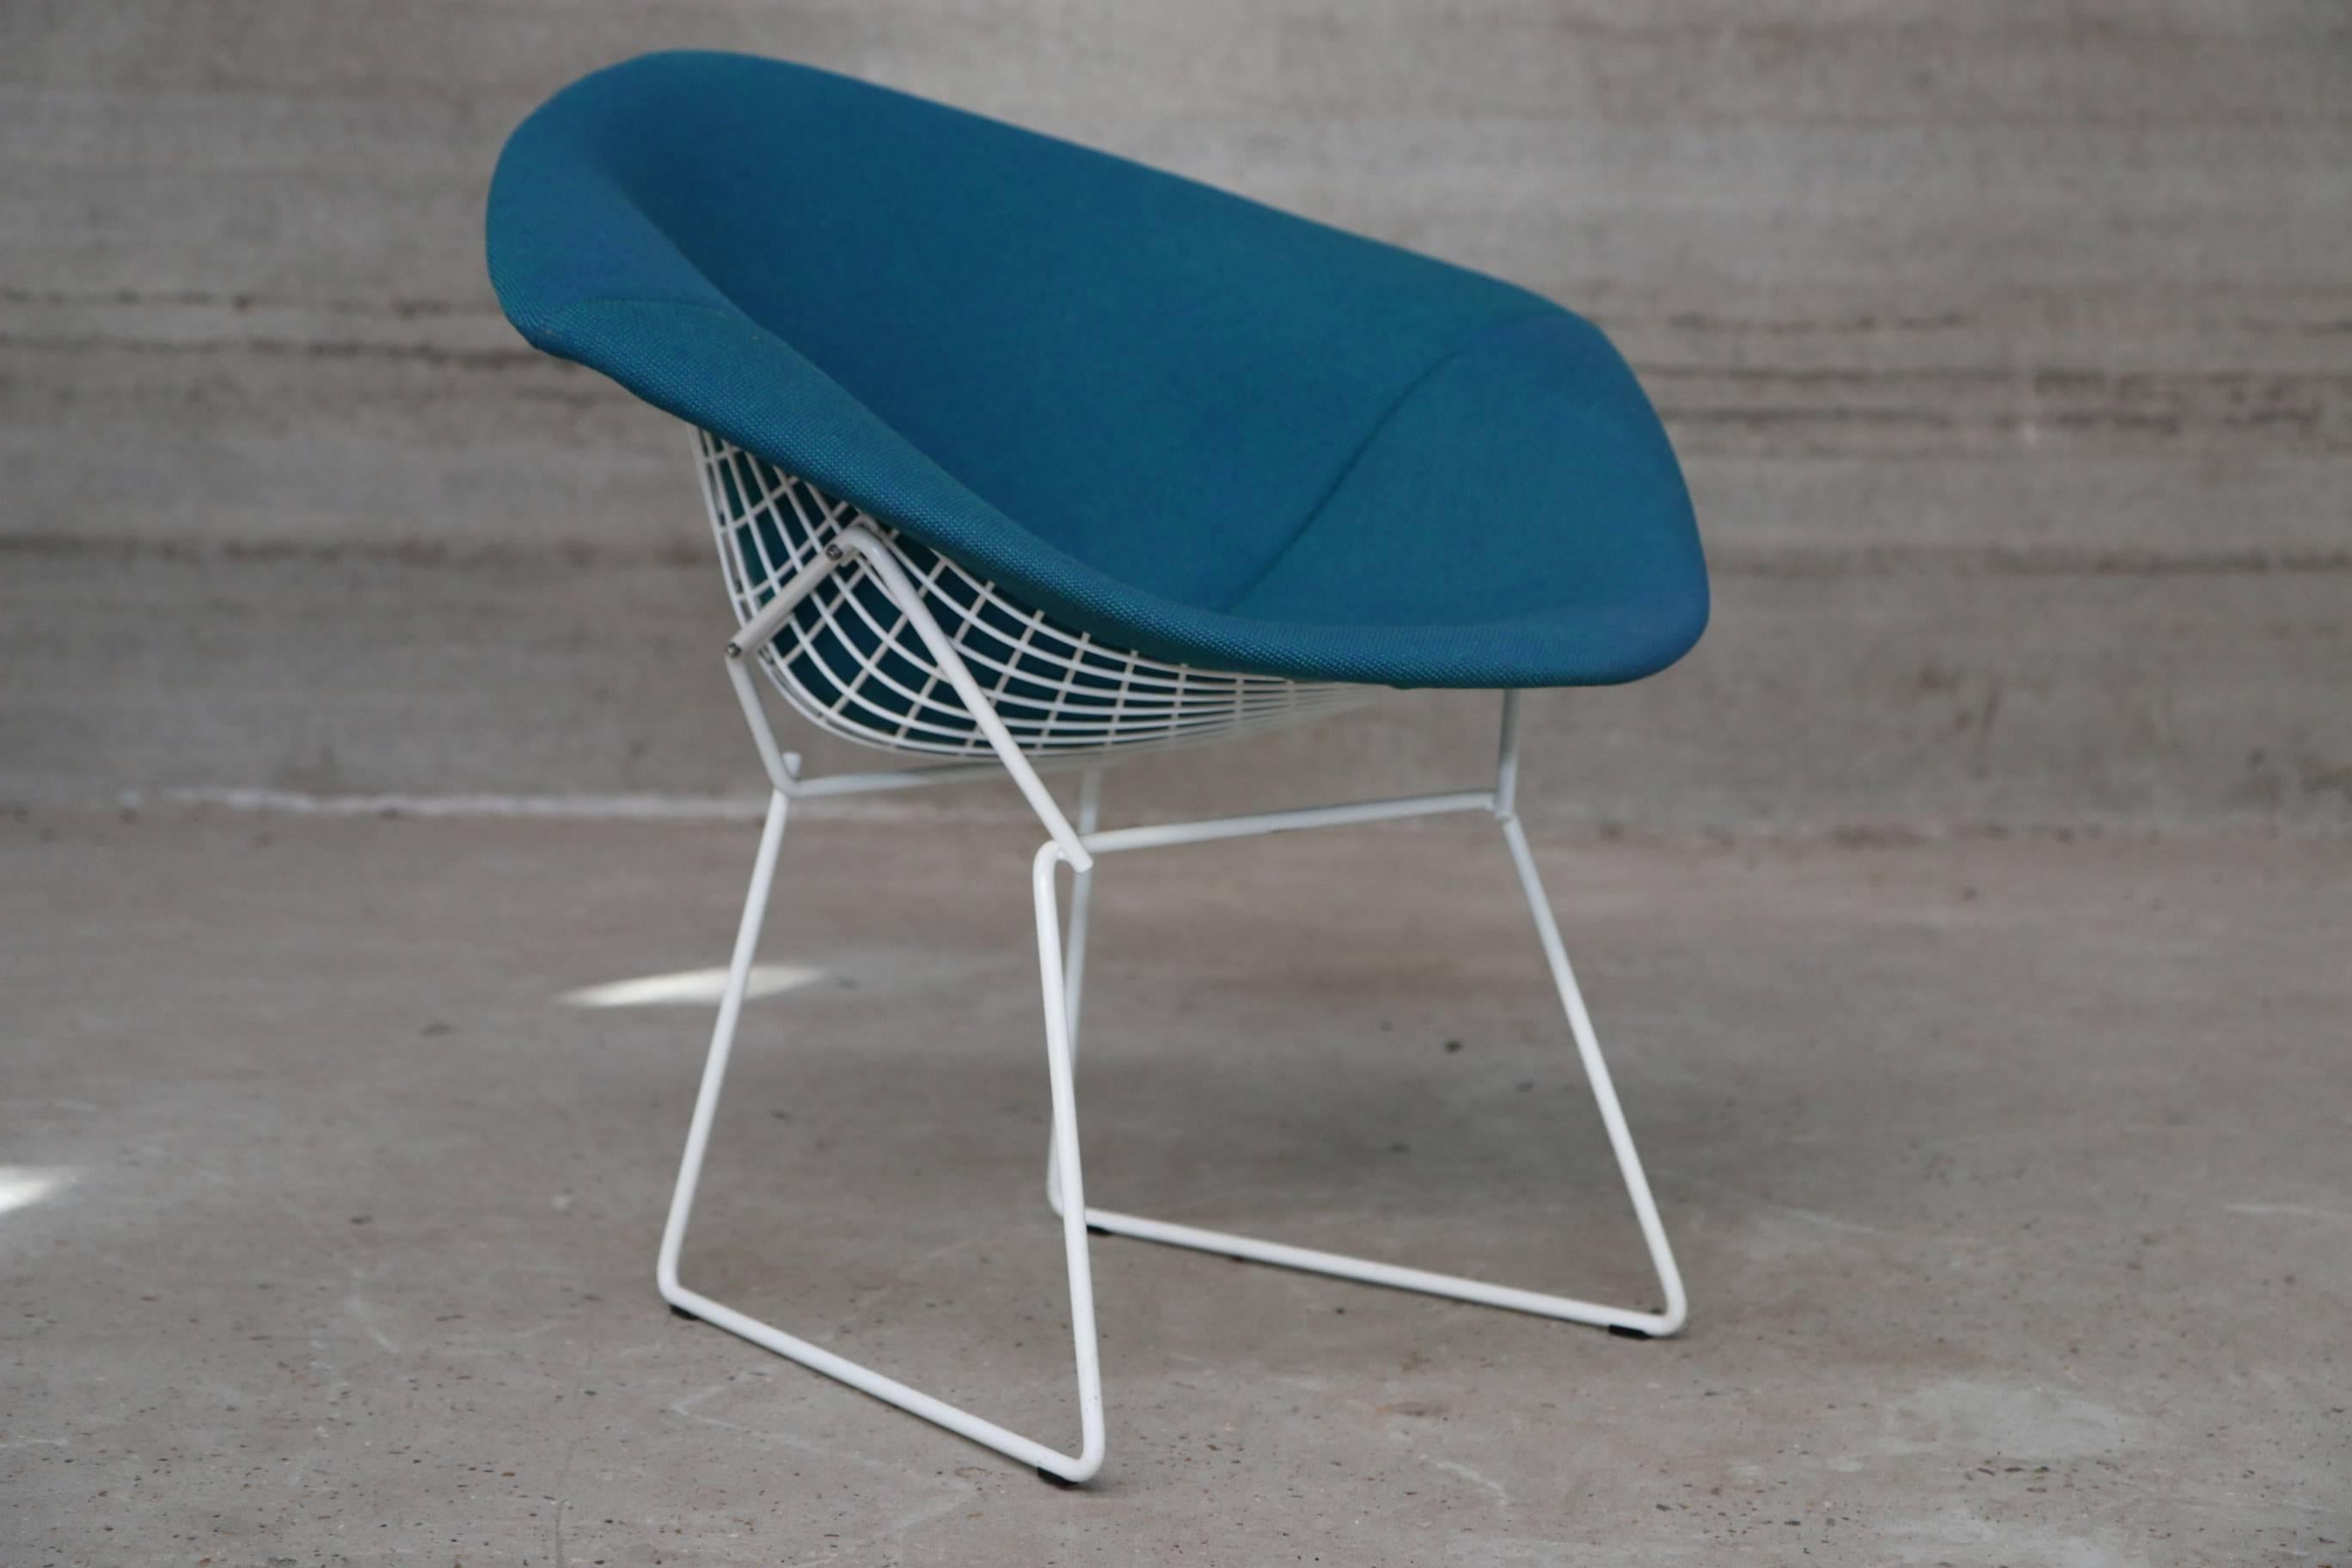 Diamond chair designed by Harry Bertoia for Knoll in 1952. The chair has its original full fabric cobalt blue cover in excellent condition. The white frame is also superb.
An iconic chair in perfect condition.
We have two similar available.